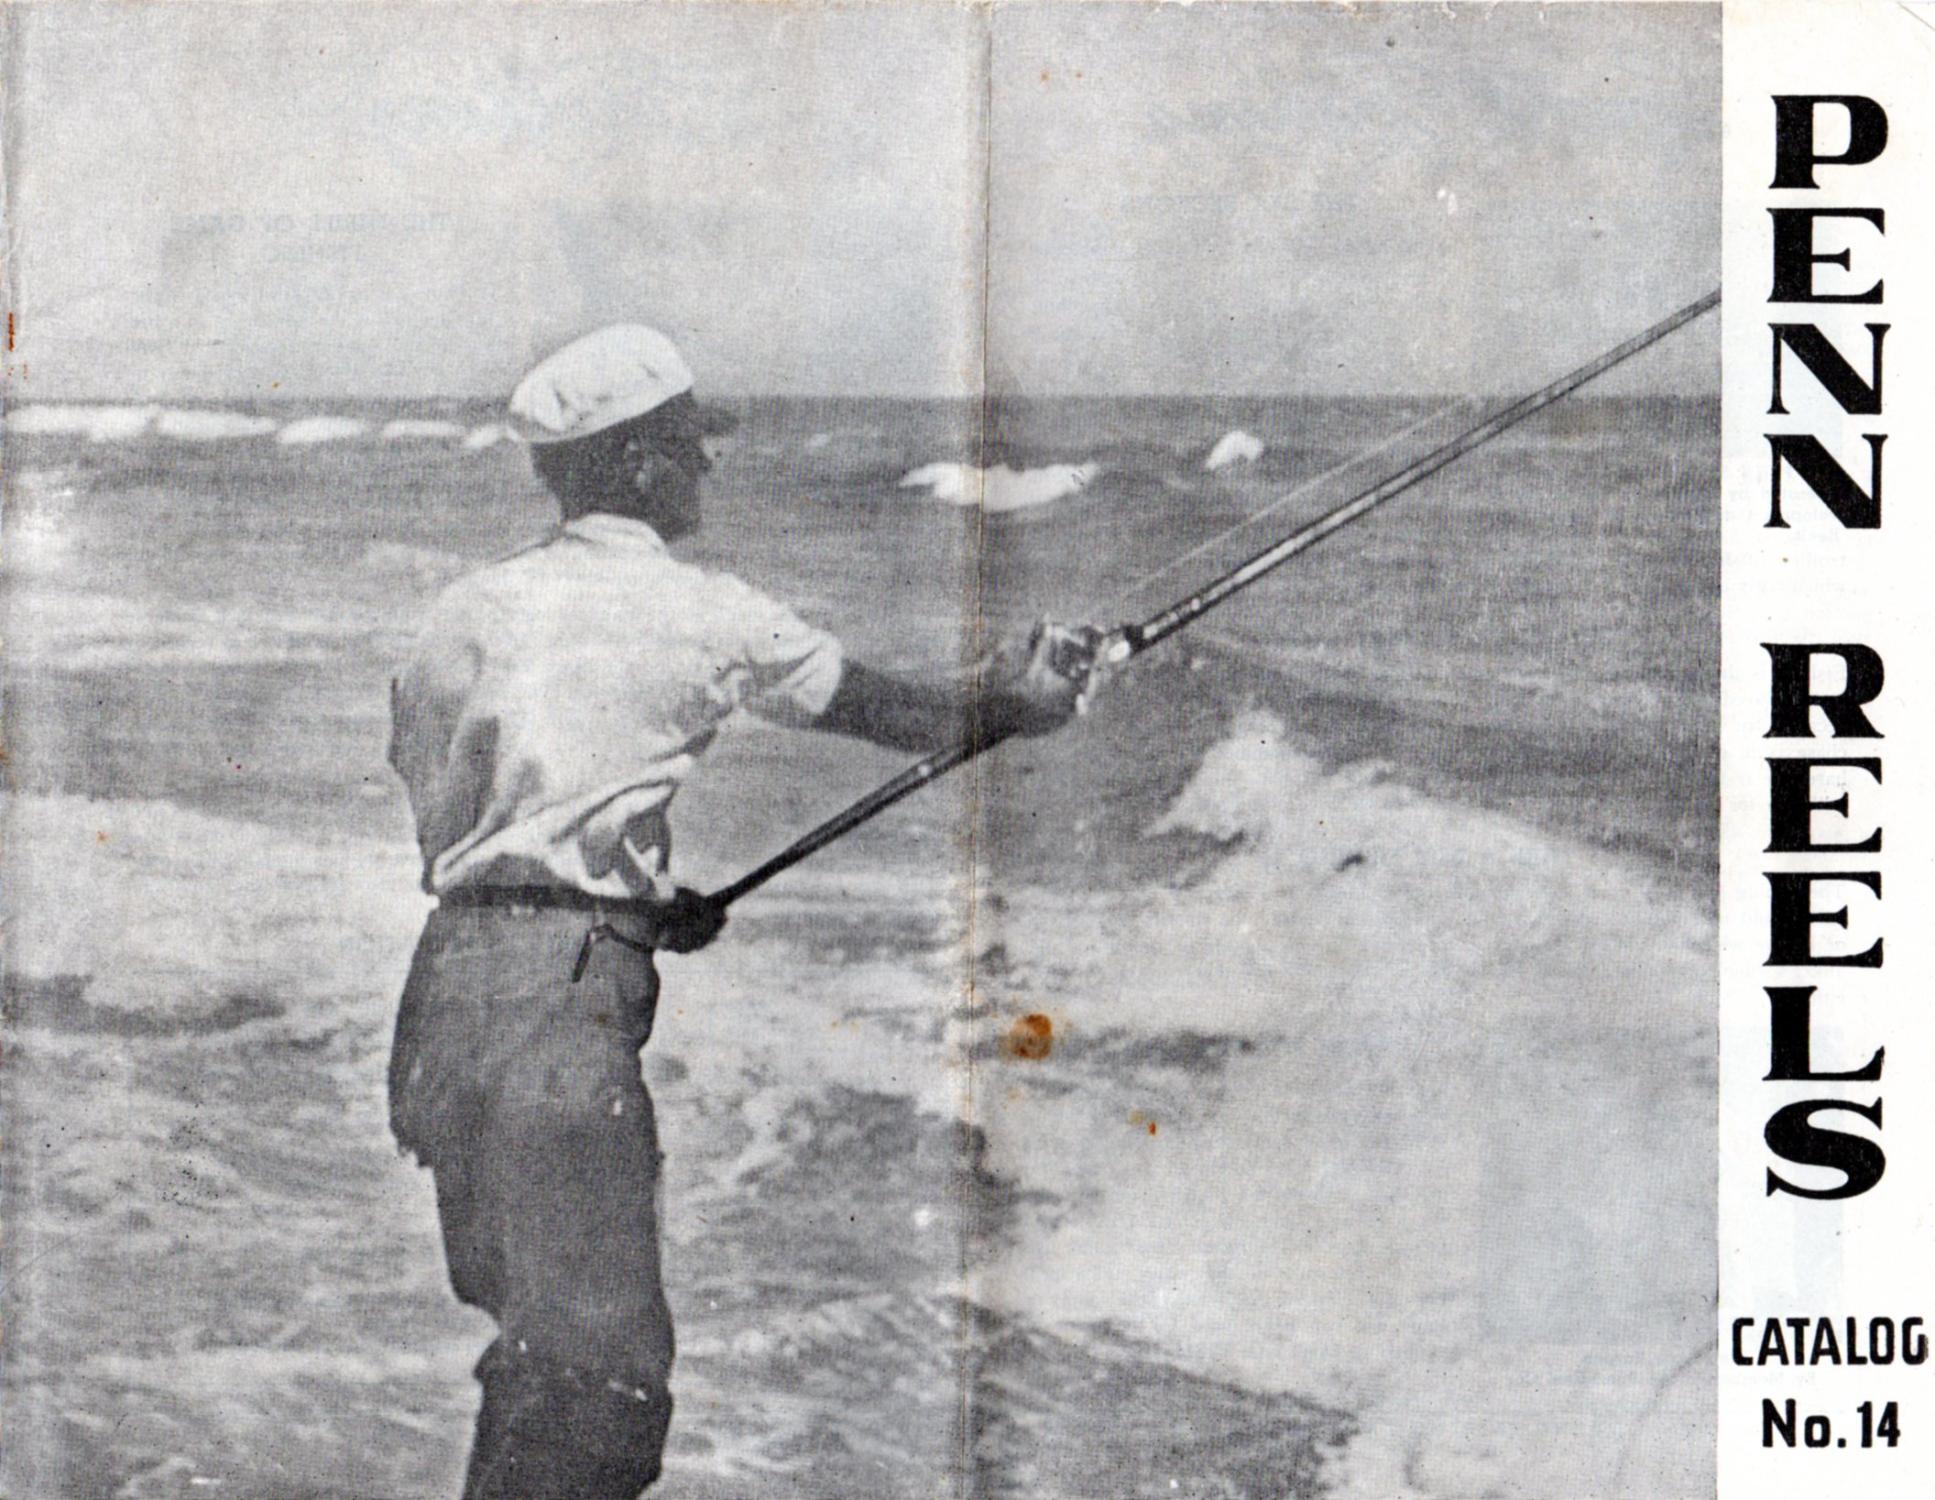 Penn Reels Catalog 14 by Penn Fishing Tackle: Very Good Soft cover (1944)